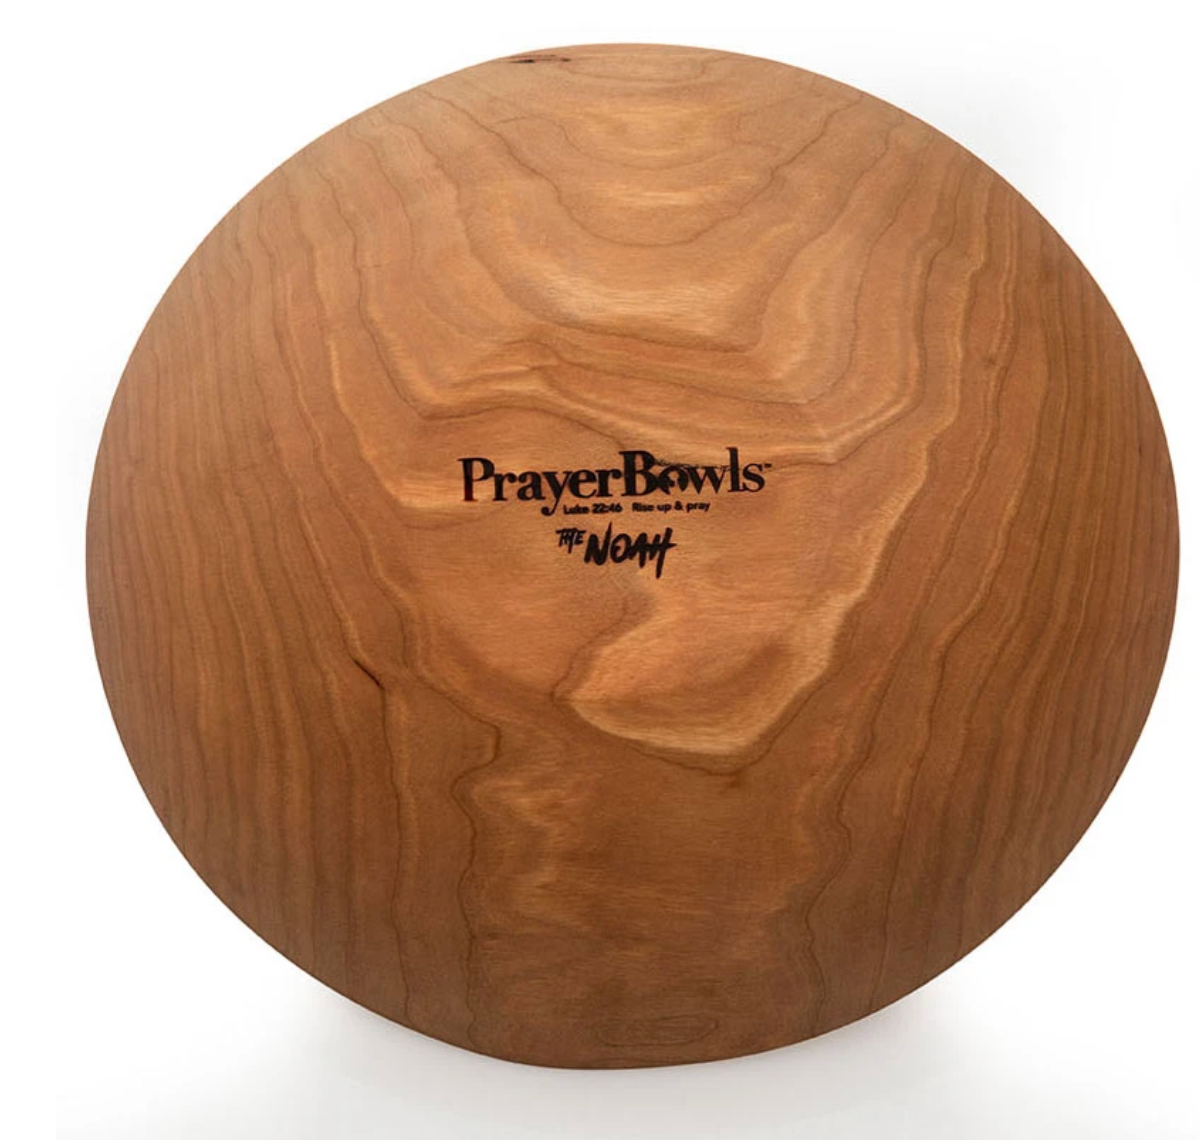 Pictured is the bottom of the Noah Prayer Bowl. Pressed into the base is the Prayer Bowls logo.